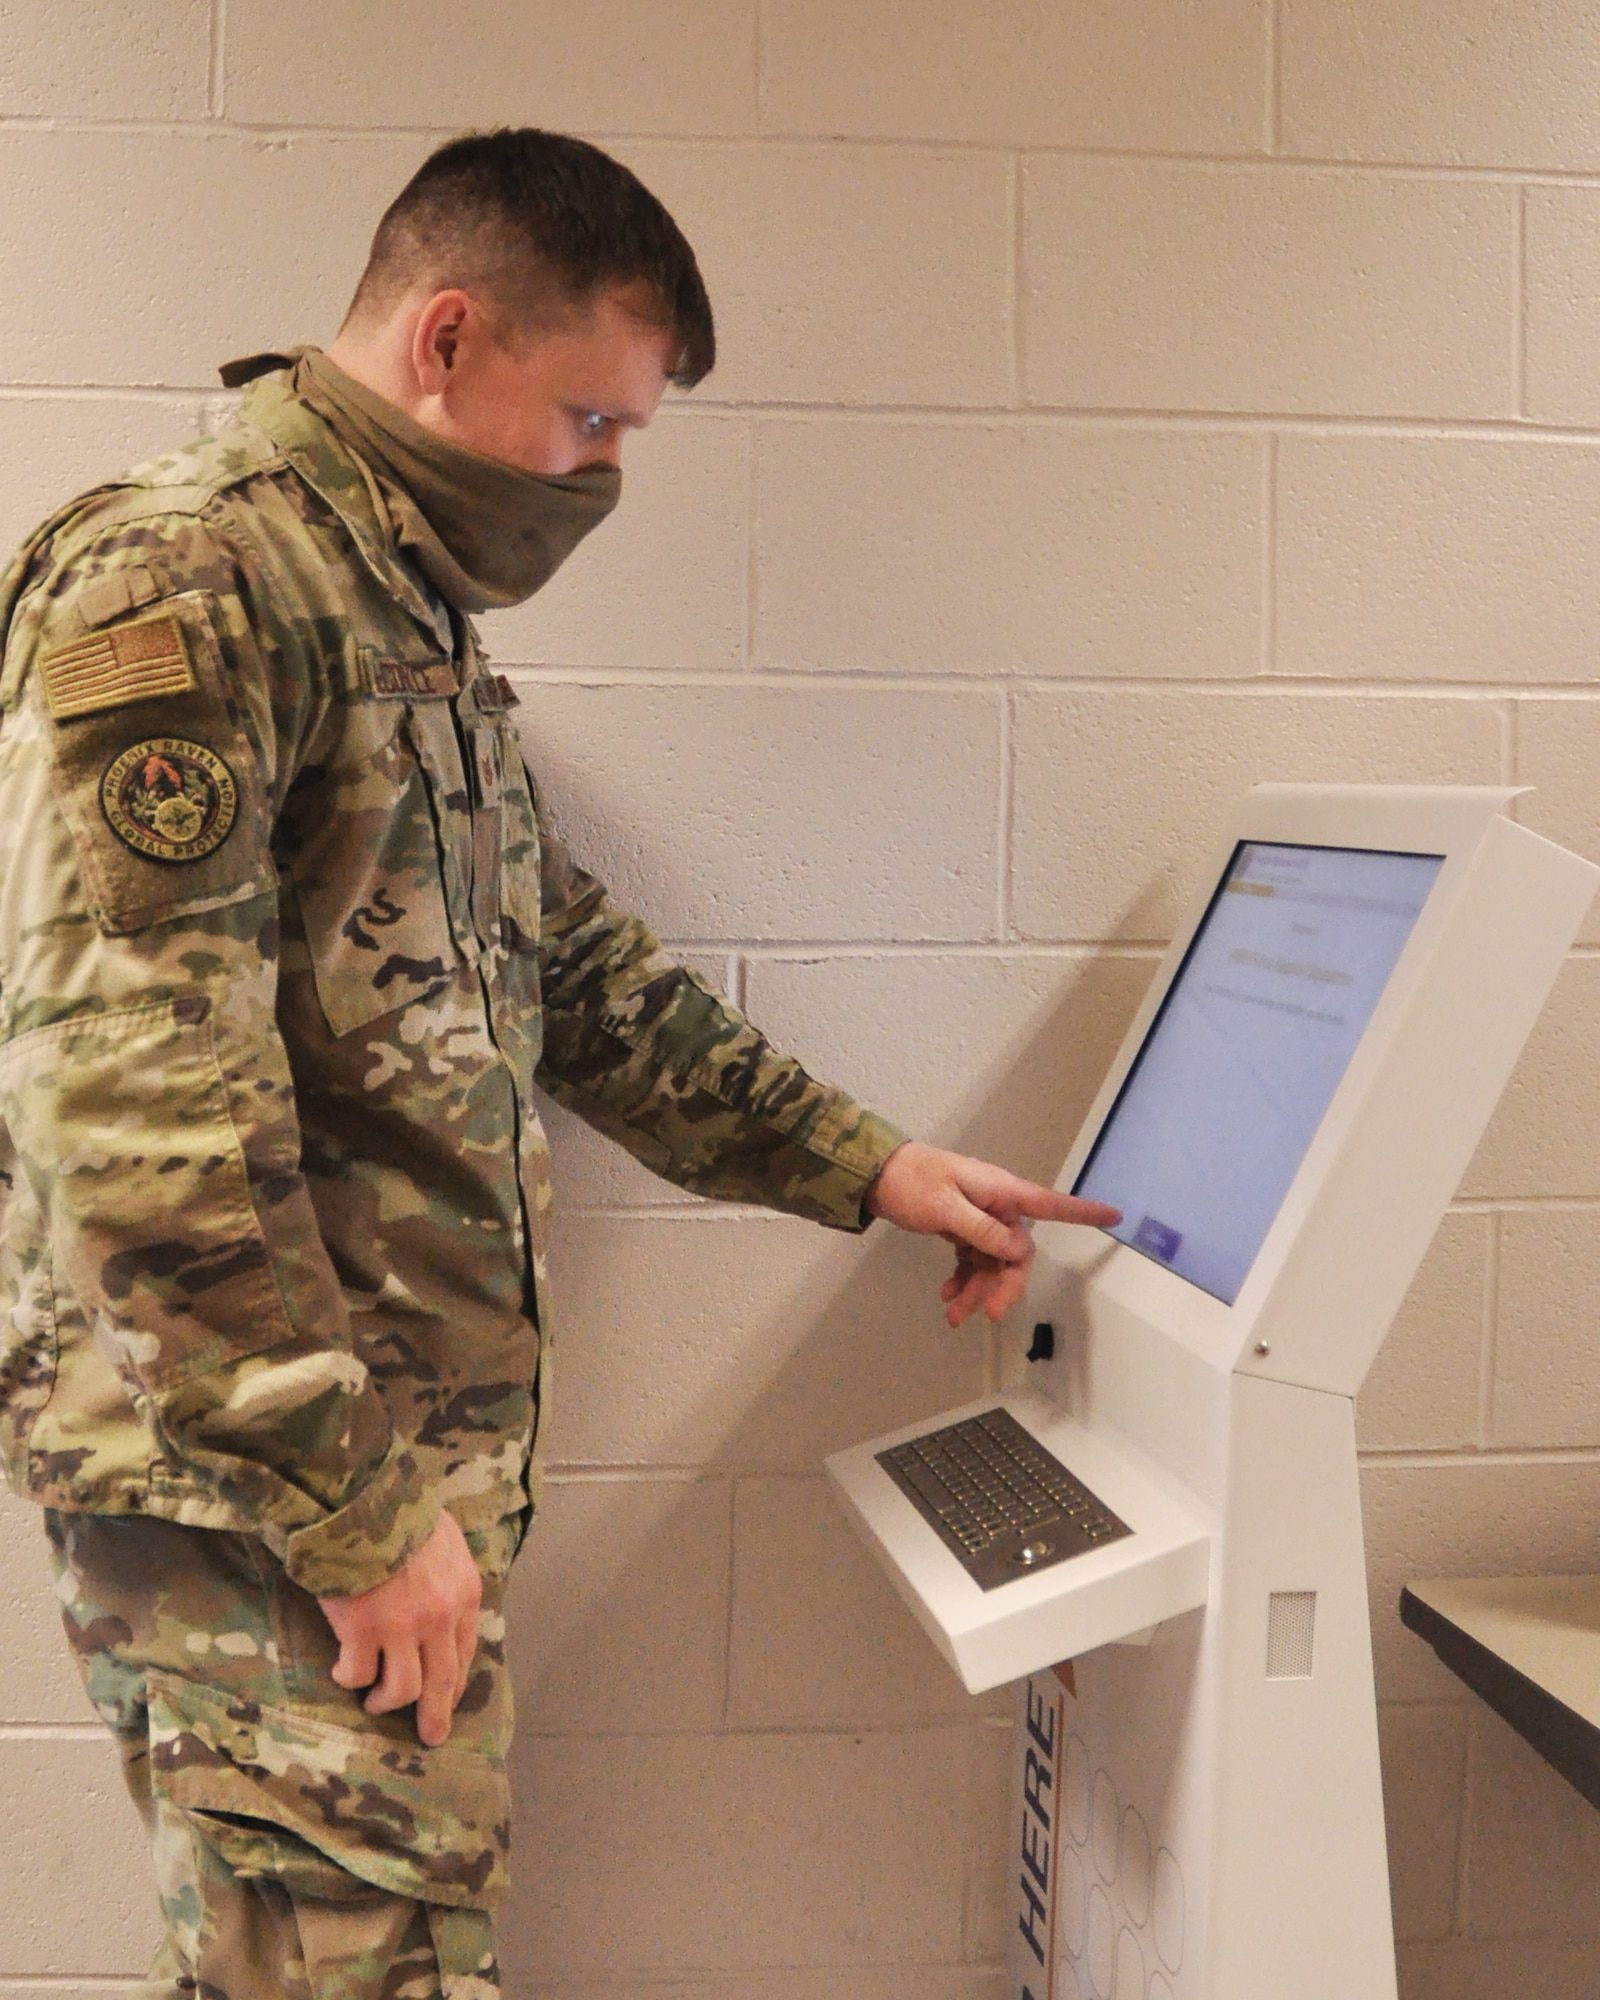 Tech. Sgt. Jacob McCorkle, 445th Security Forces Squadron, signs in via the new kiosk located in the hallway by the personnel office, building 4014. Customers seeking services from the 445th Force Support Squadron are greeted by a new, digital sign in system.